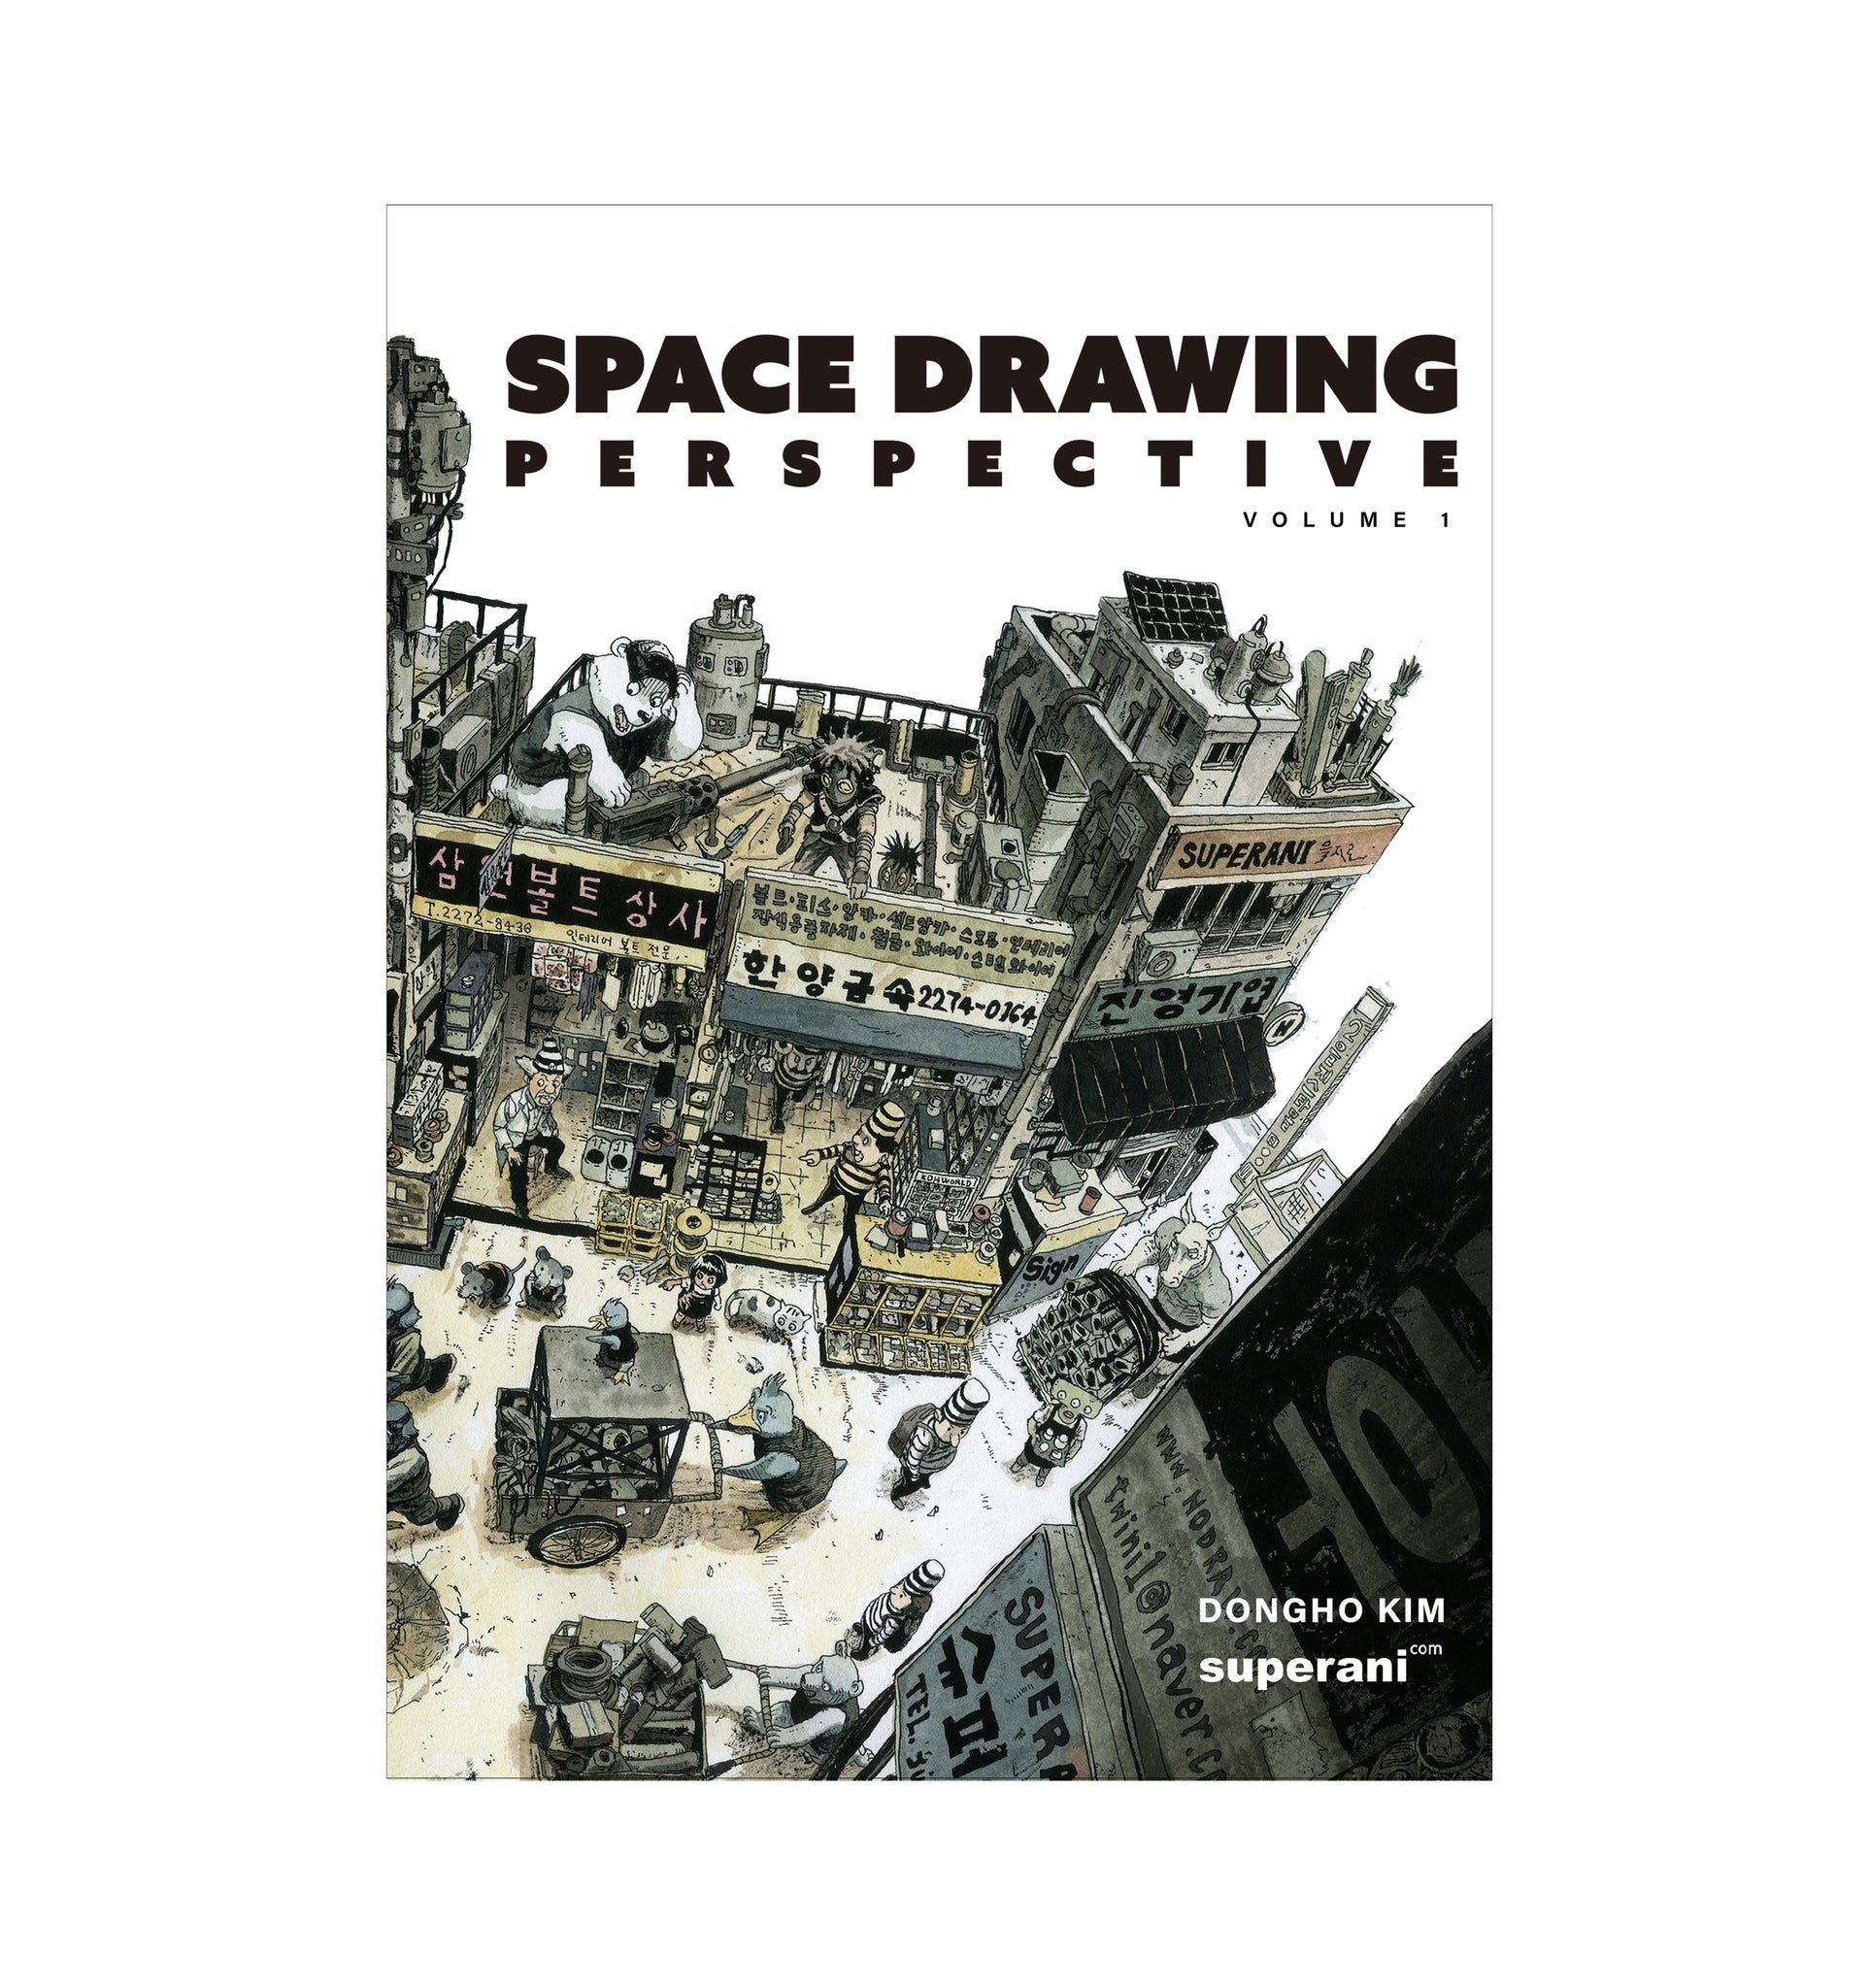 Space Drawing: Perspective by Dong Ho Kim